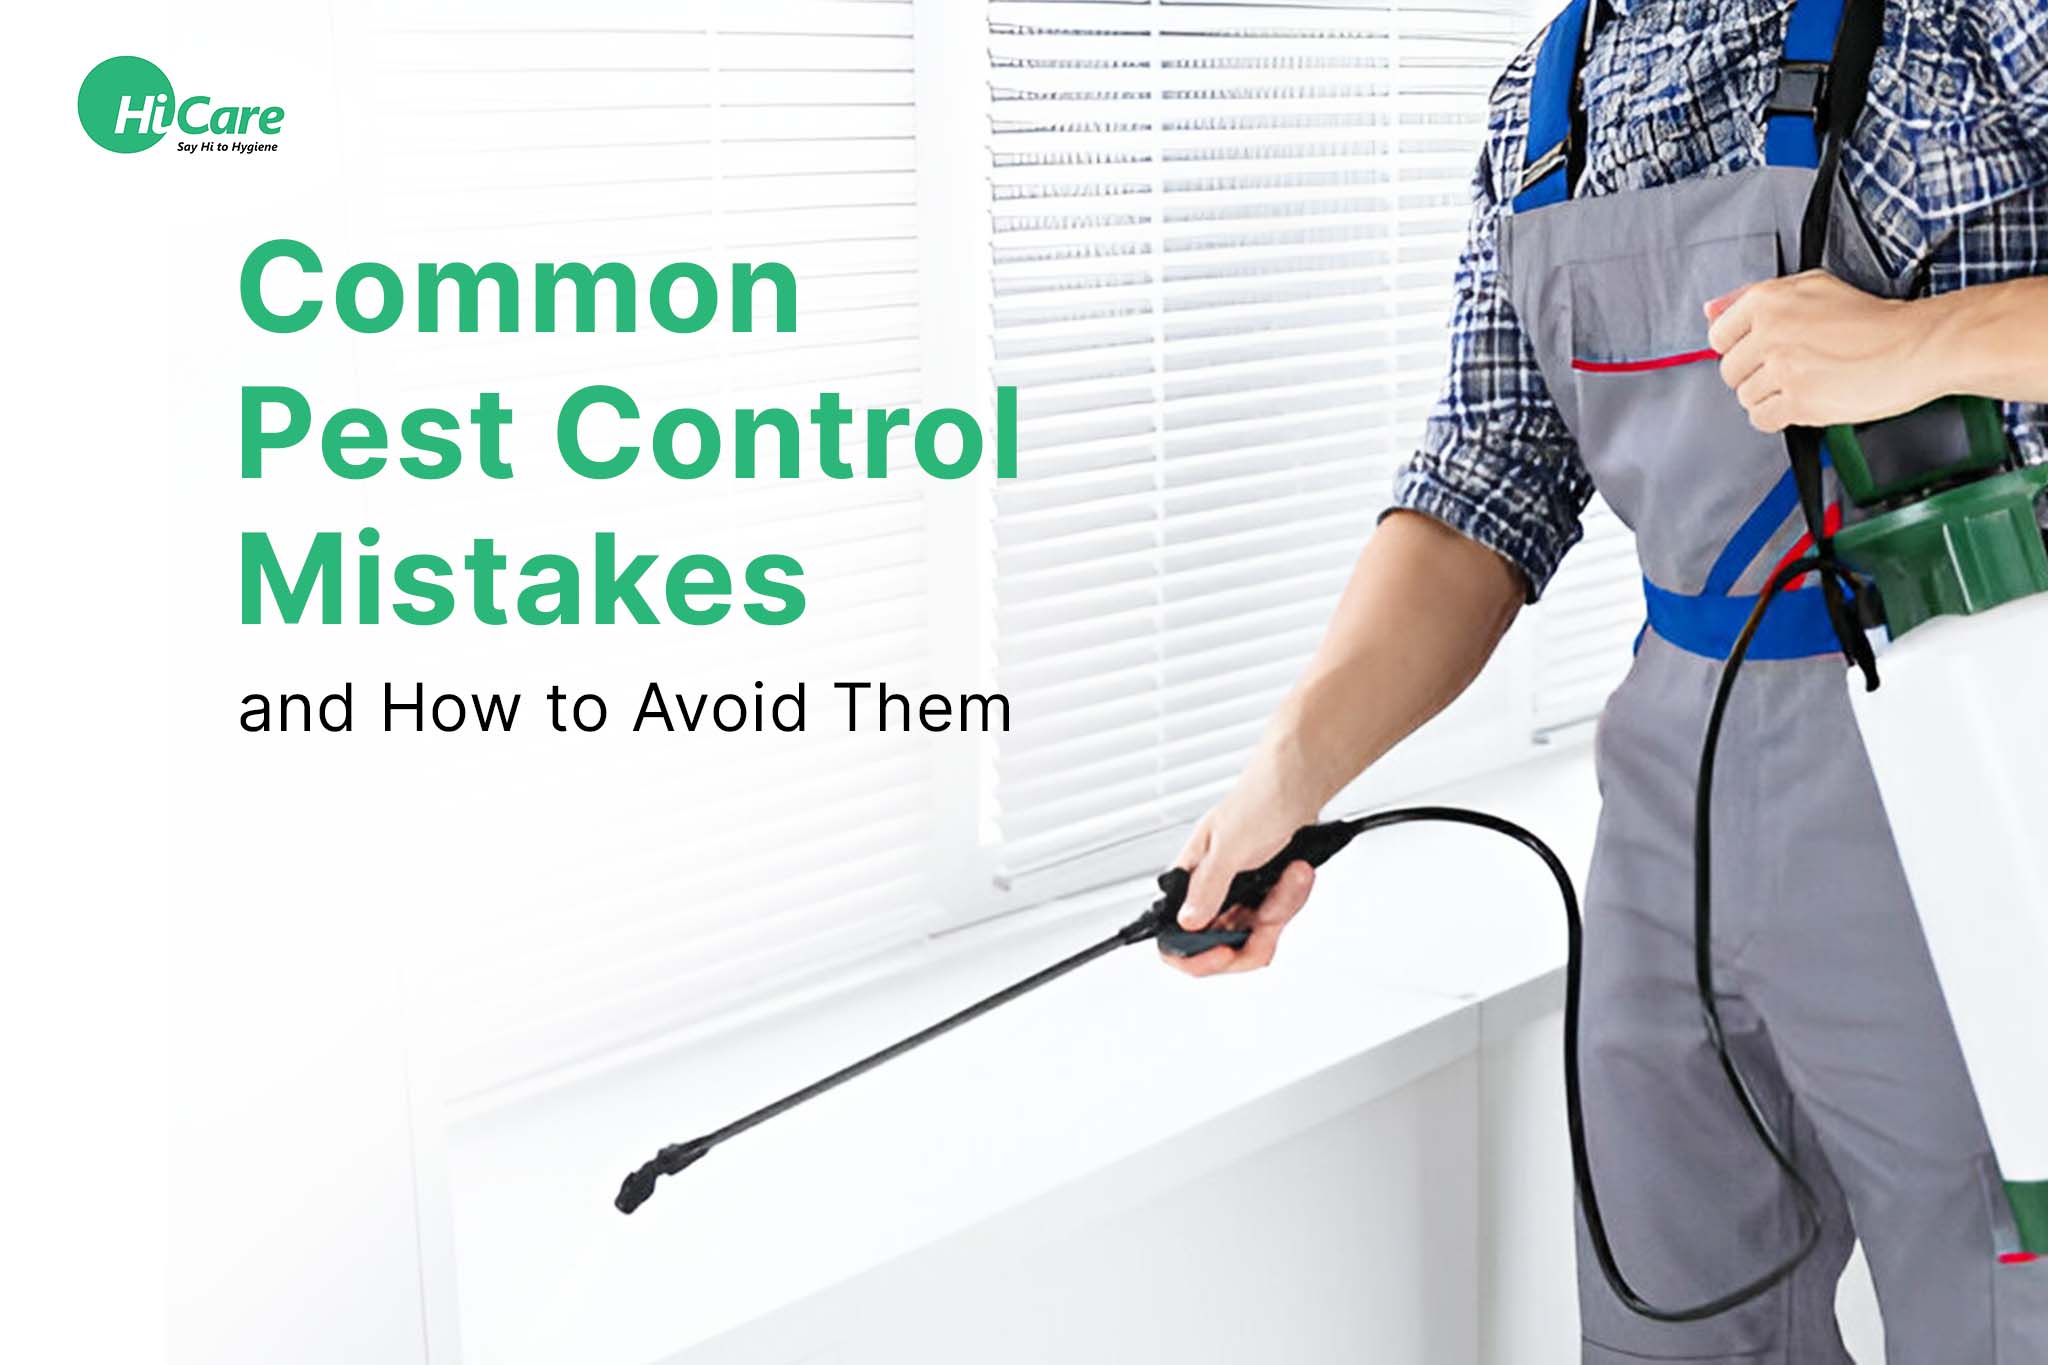 7 Common Pest Control Mistakes and How to Avoid Them